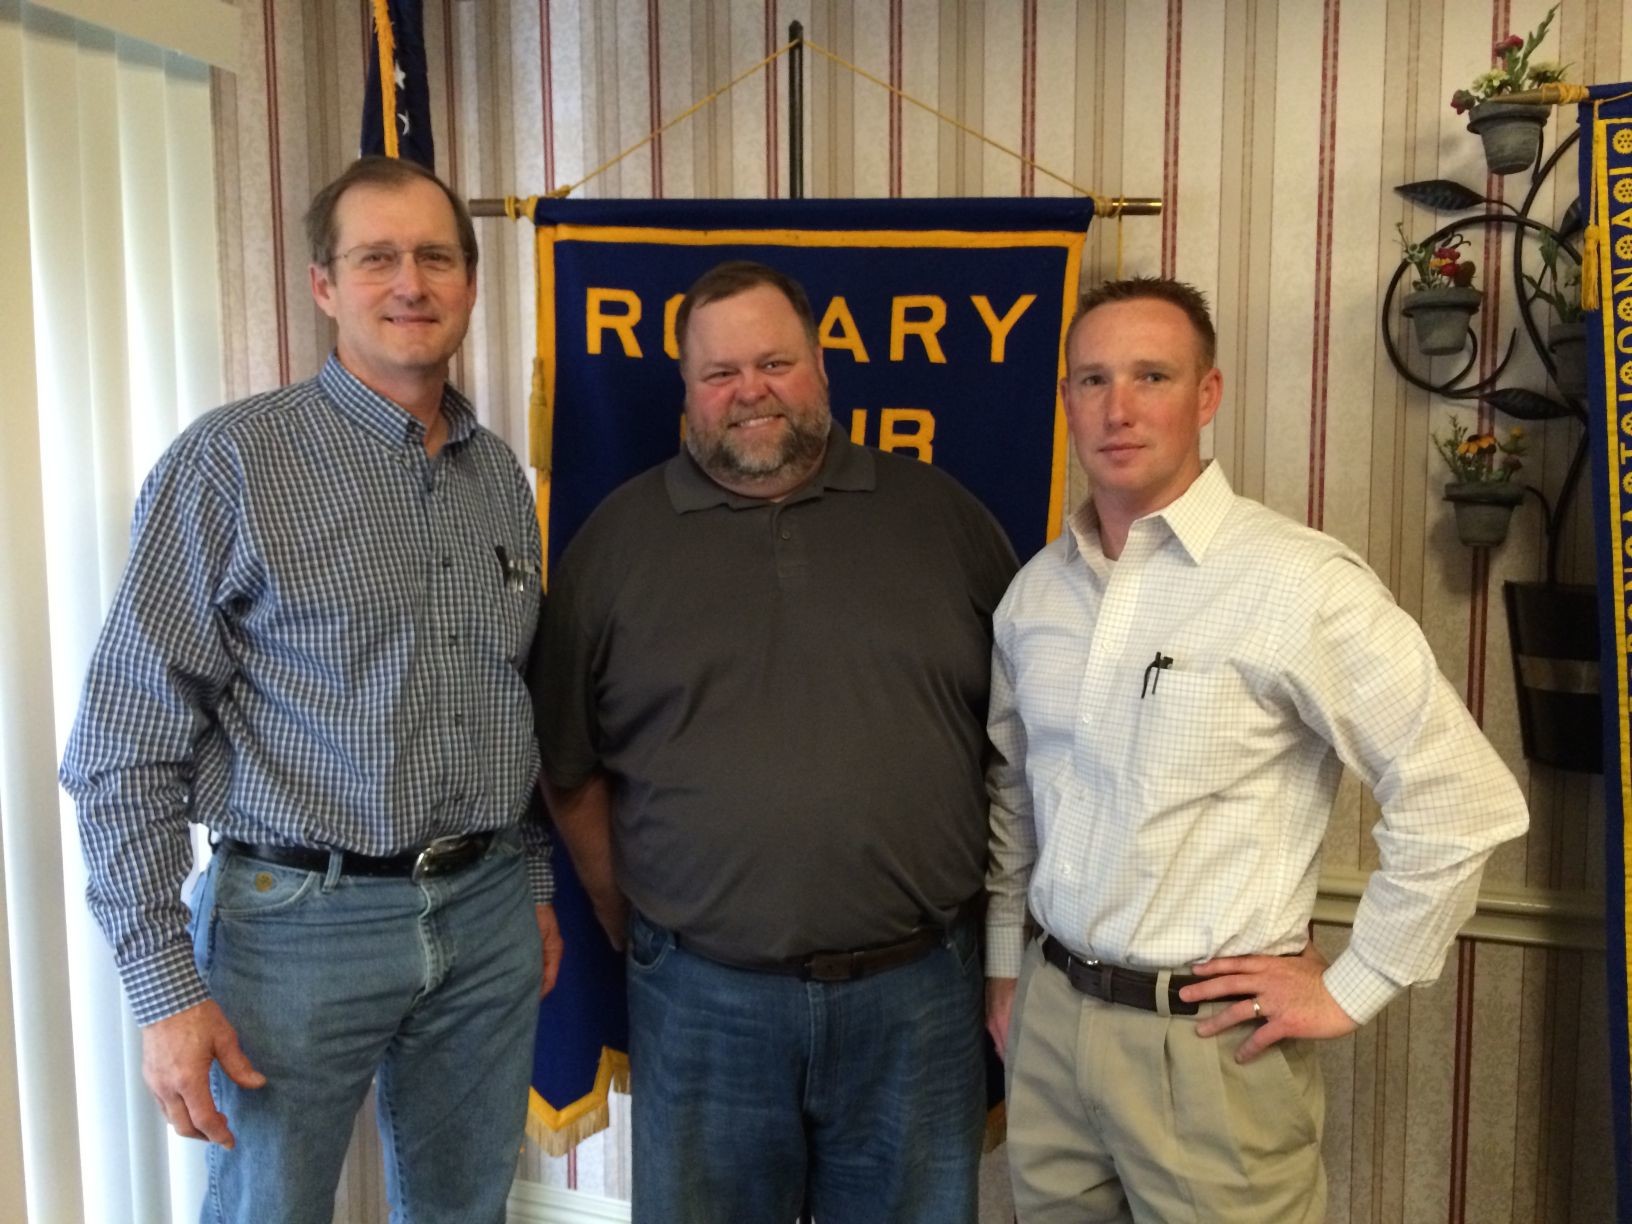 Gonzales Rotarians heard an update on current highway projects from TxDOT officials Tuesday. Shown from left are Rotarian Bryan Glass; Joseph Kridler, TxDOT Maintenance Supervisor for Gonzales County and Jeffery Vinklarek, Director of Operations for TxDOT’s Yoakum District.